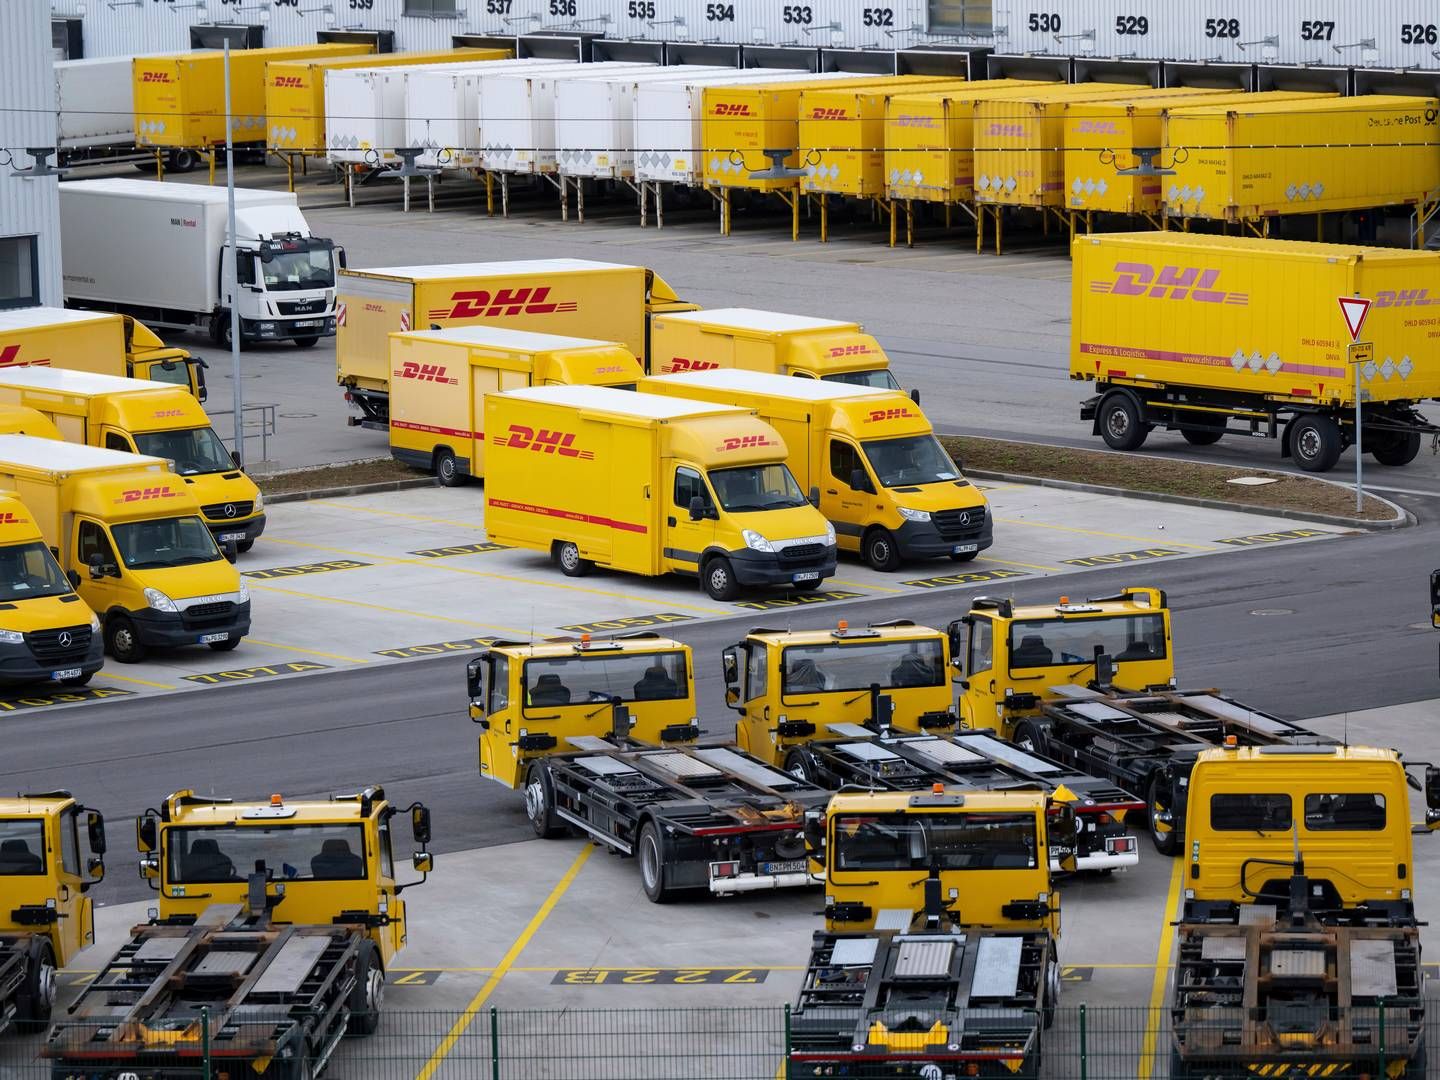 ”In terms of the stock, we prefer DHL because virtually all five business legs are currently performing well with the supply chain having already resumed growth,” says Parash Jain, HSBC’s transportation and shipping equity analyst.